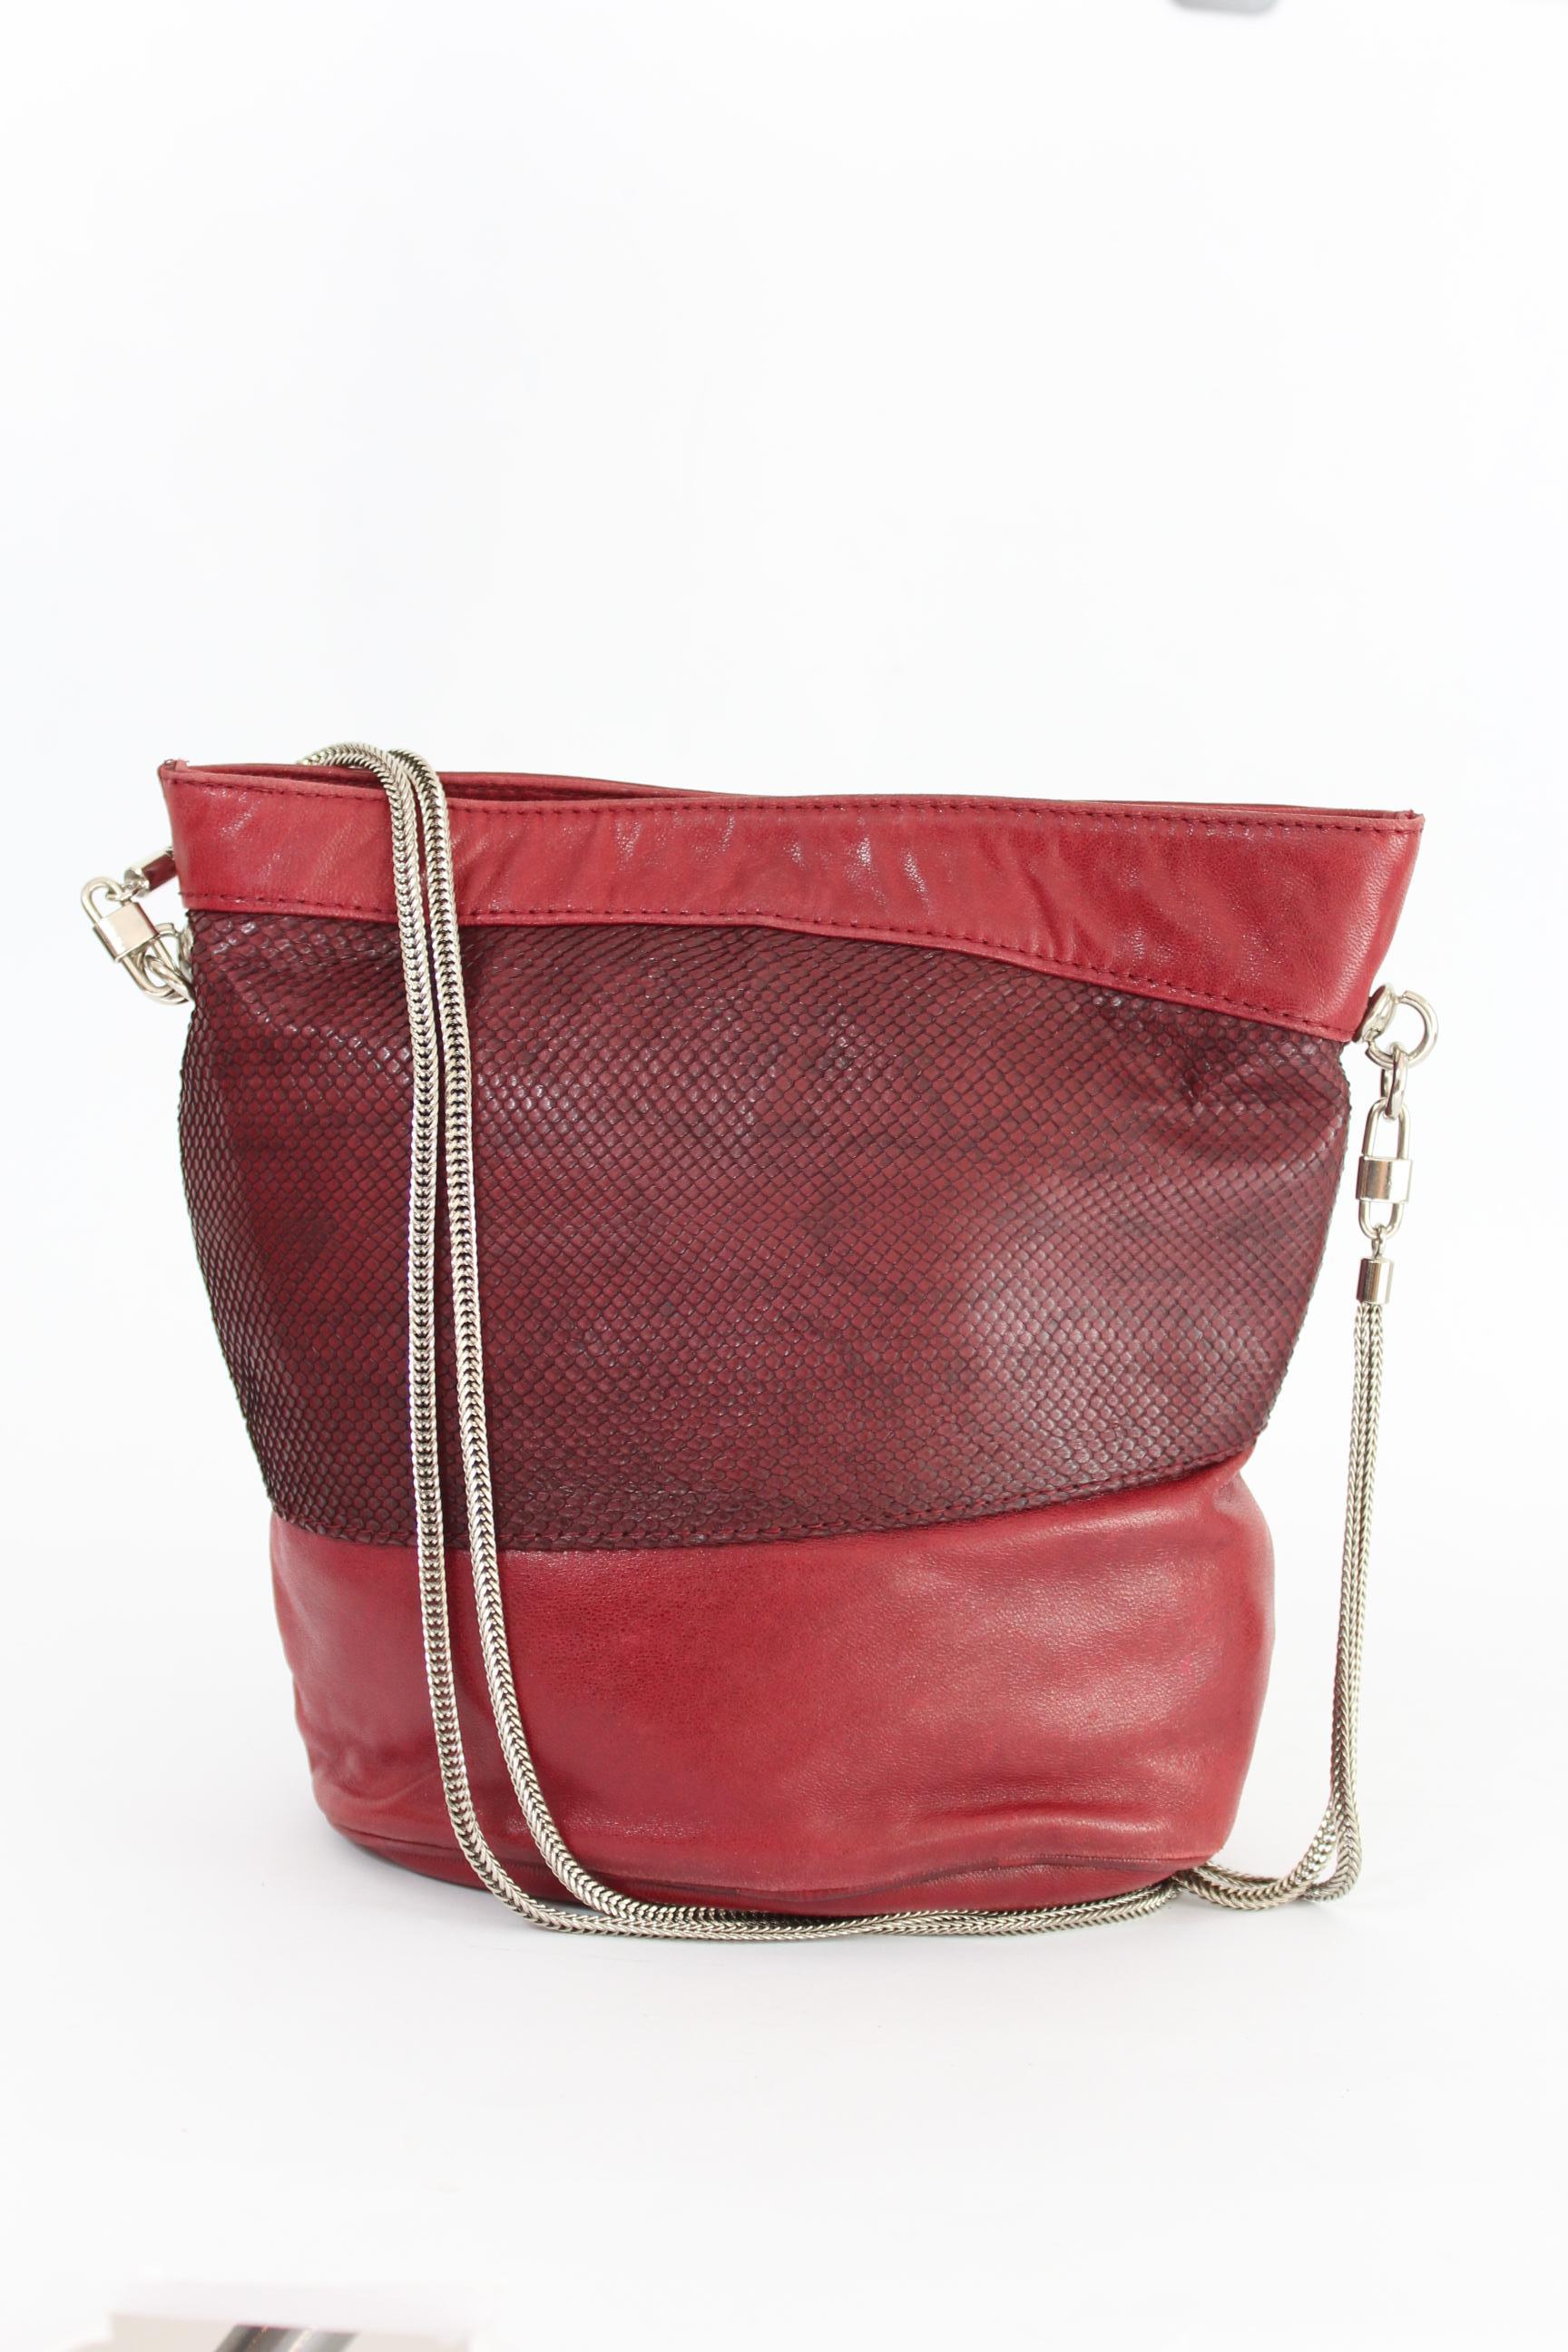 Women's Gianni Versace Red Reptile Leather Shoulder Bucket Bag 1980s